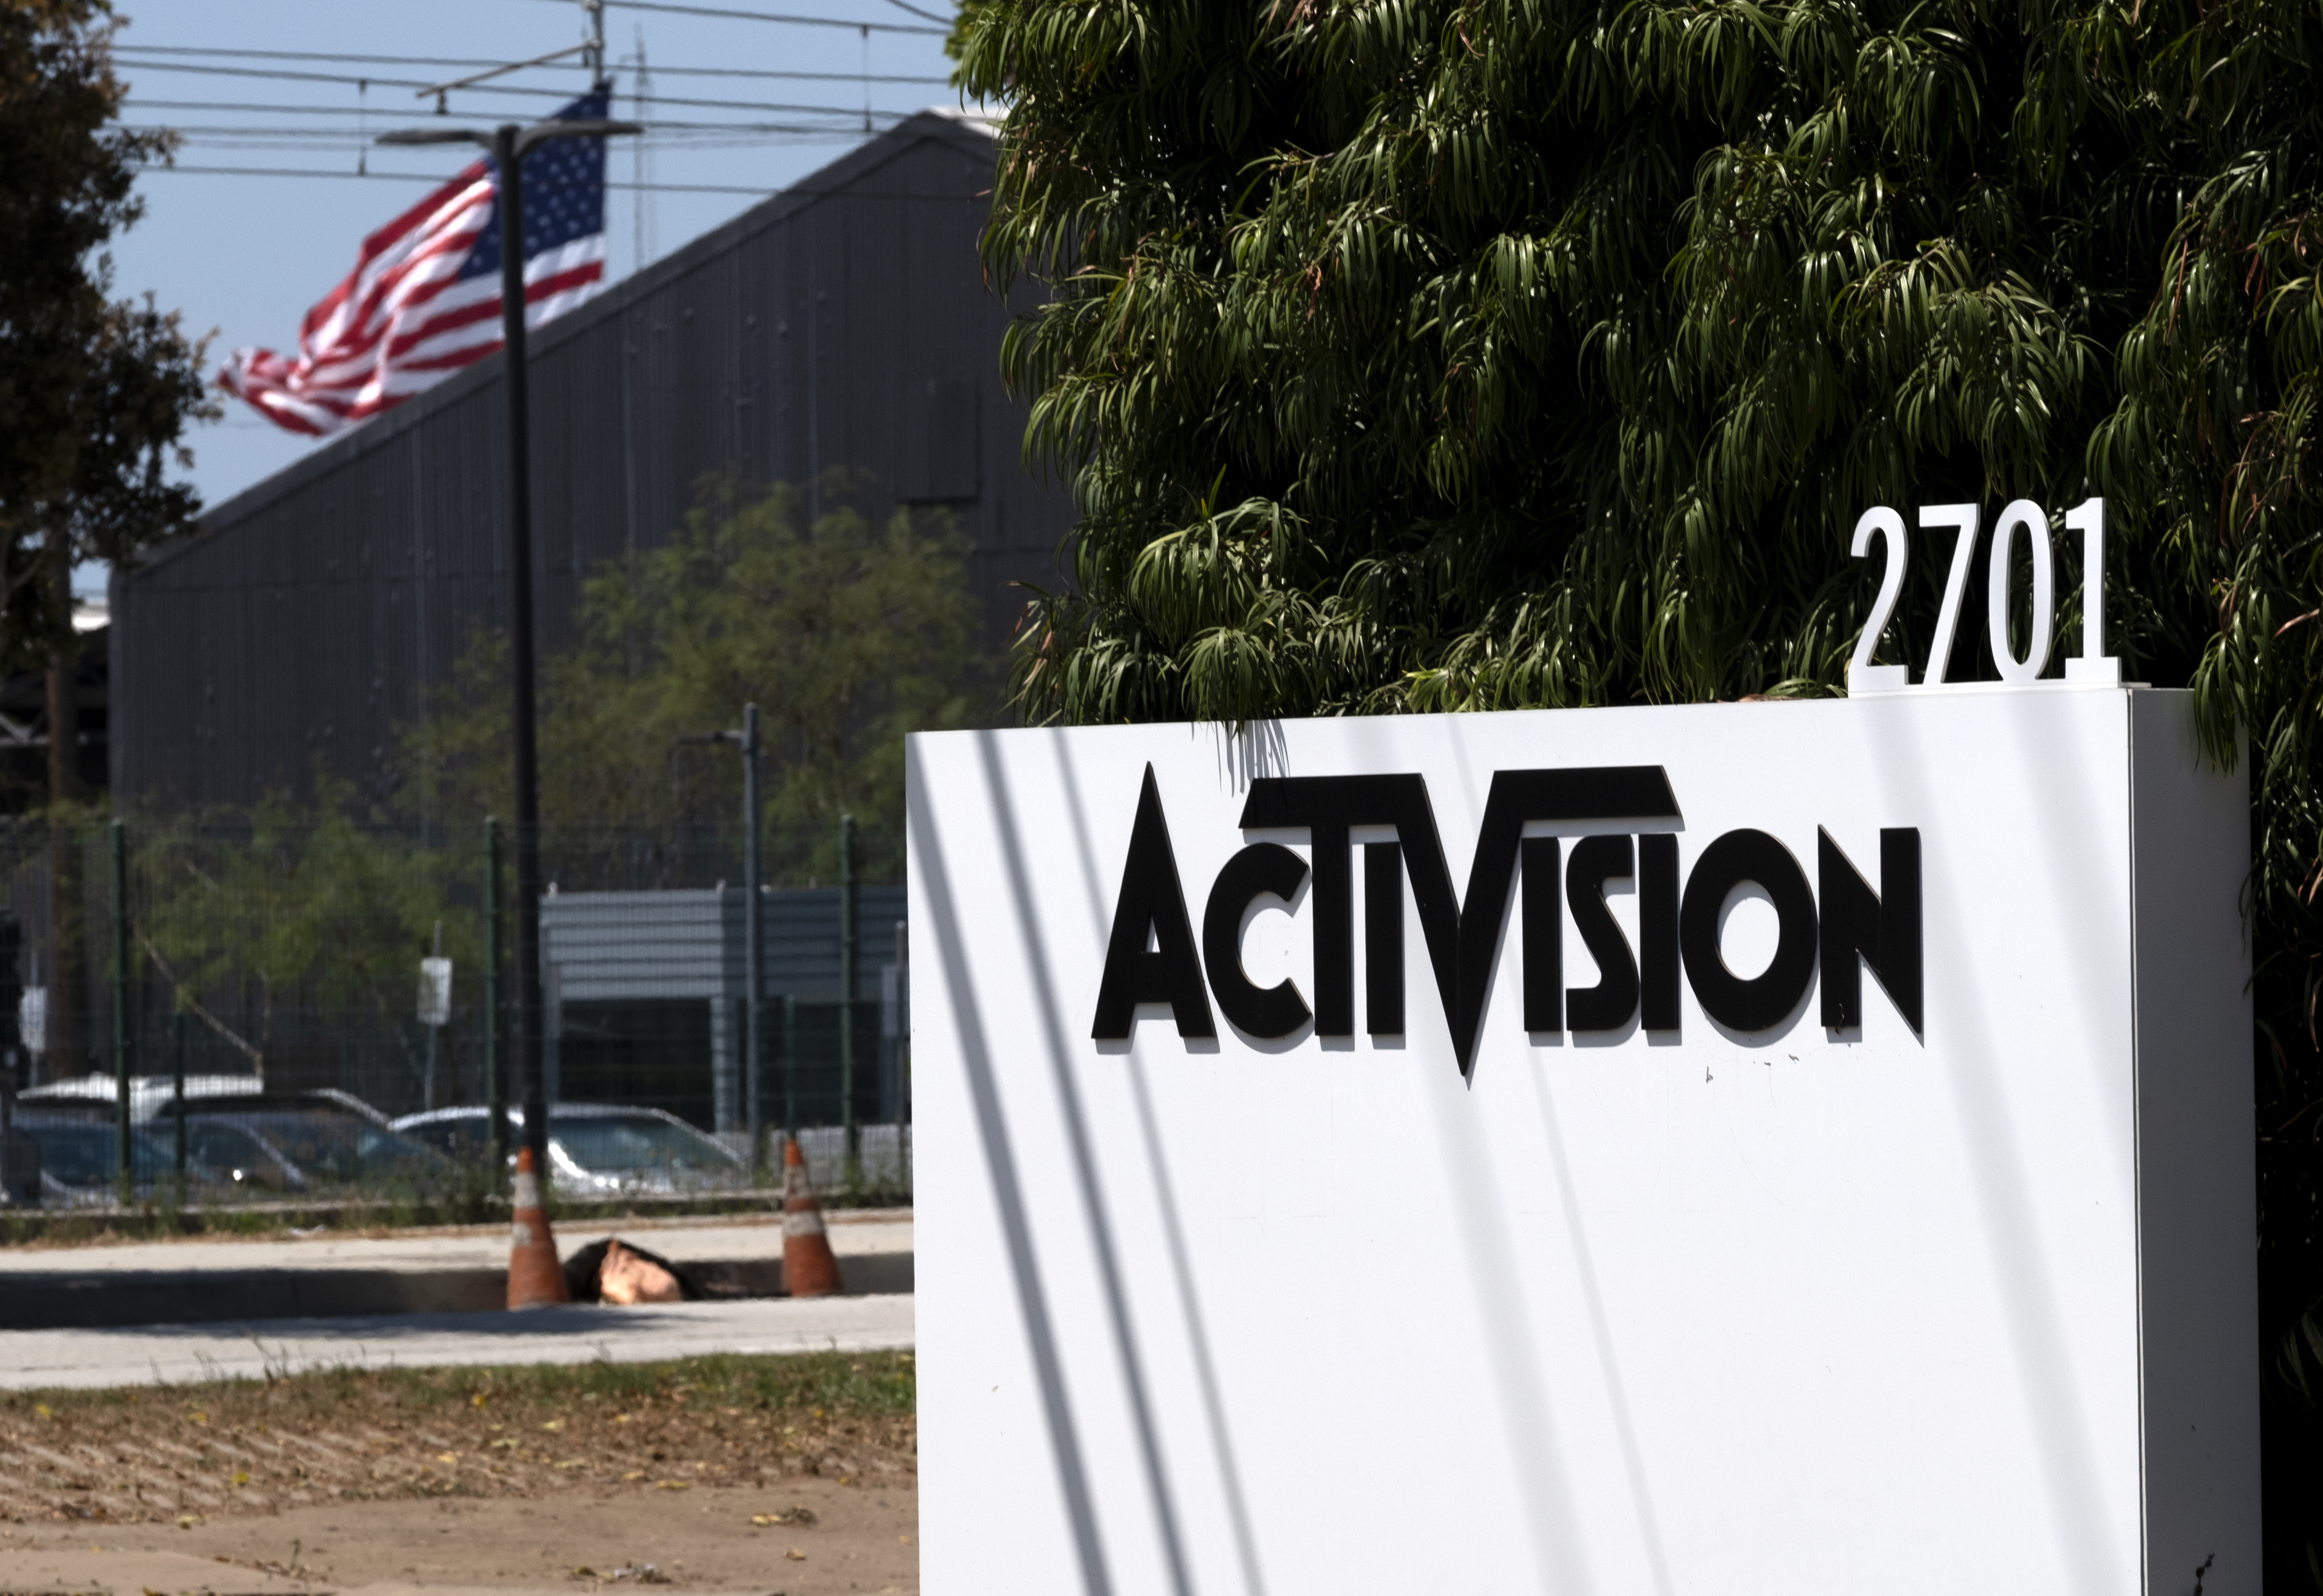 CMA gives final approval for Microsoft's Activision Blizzard